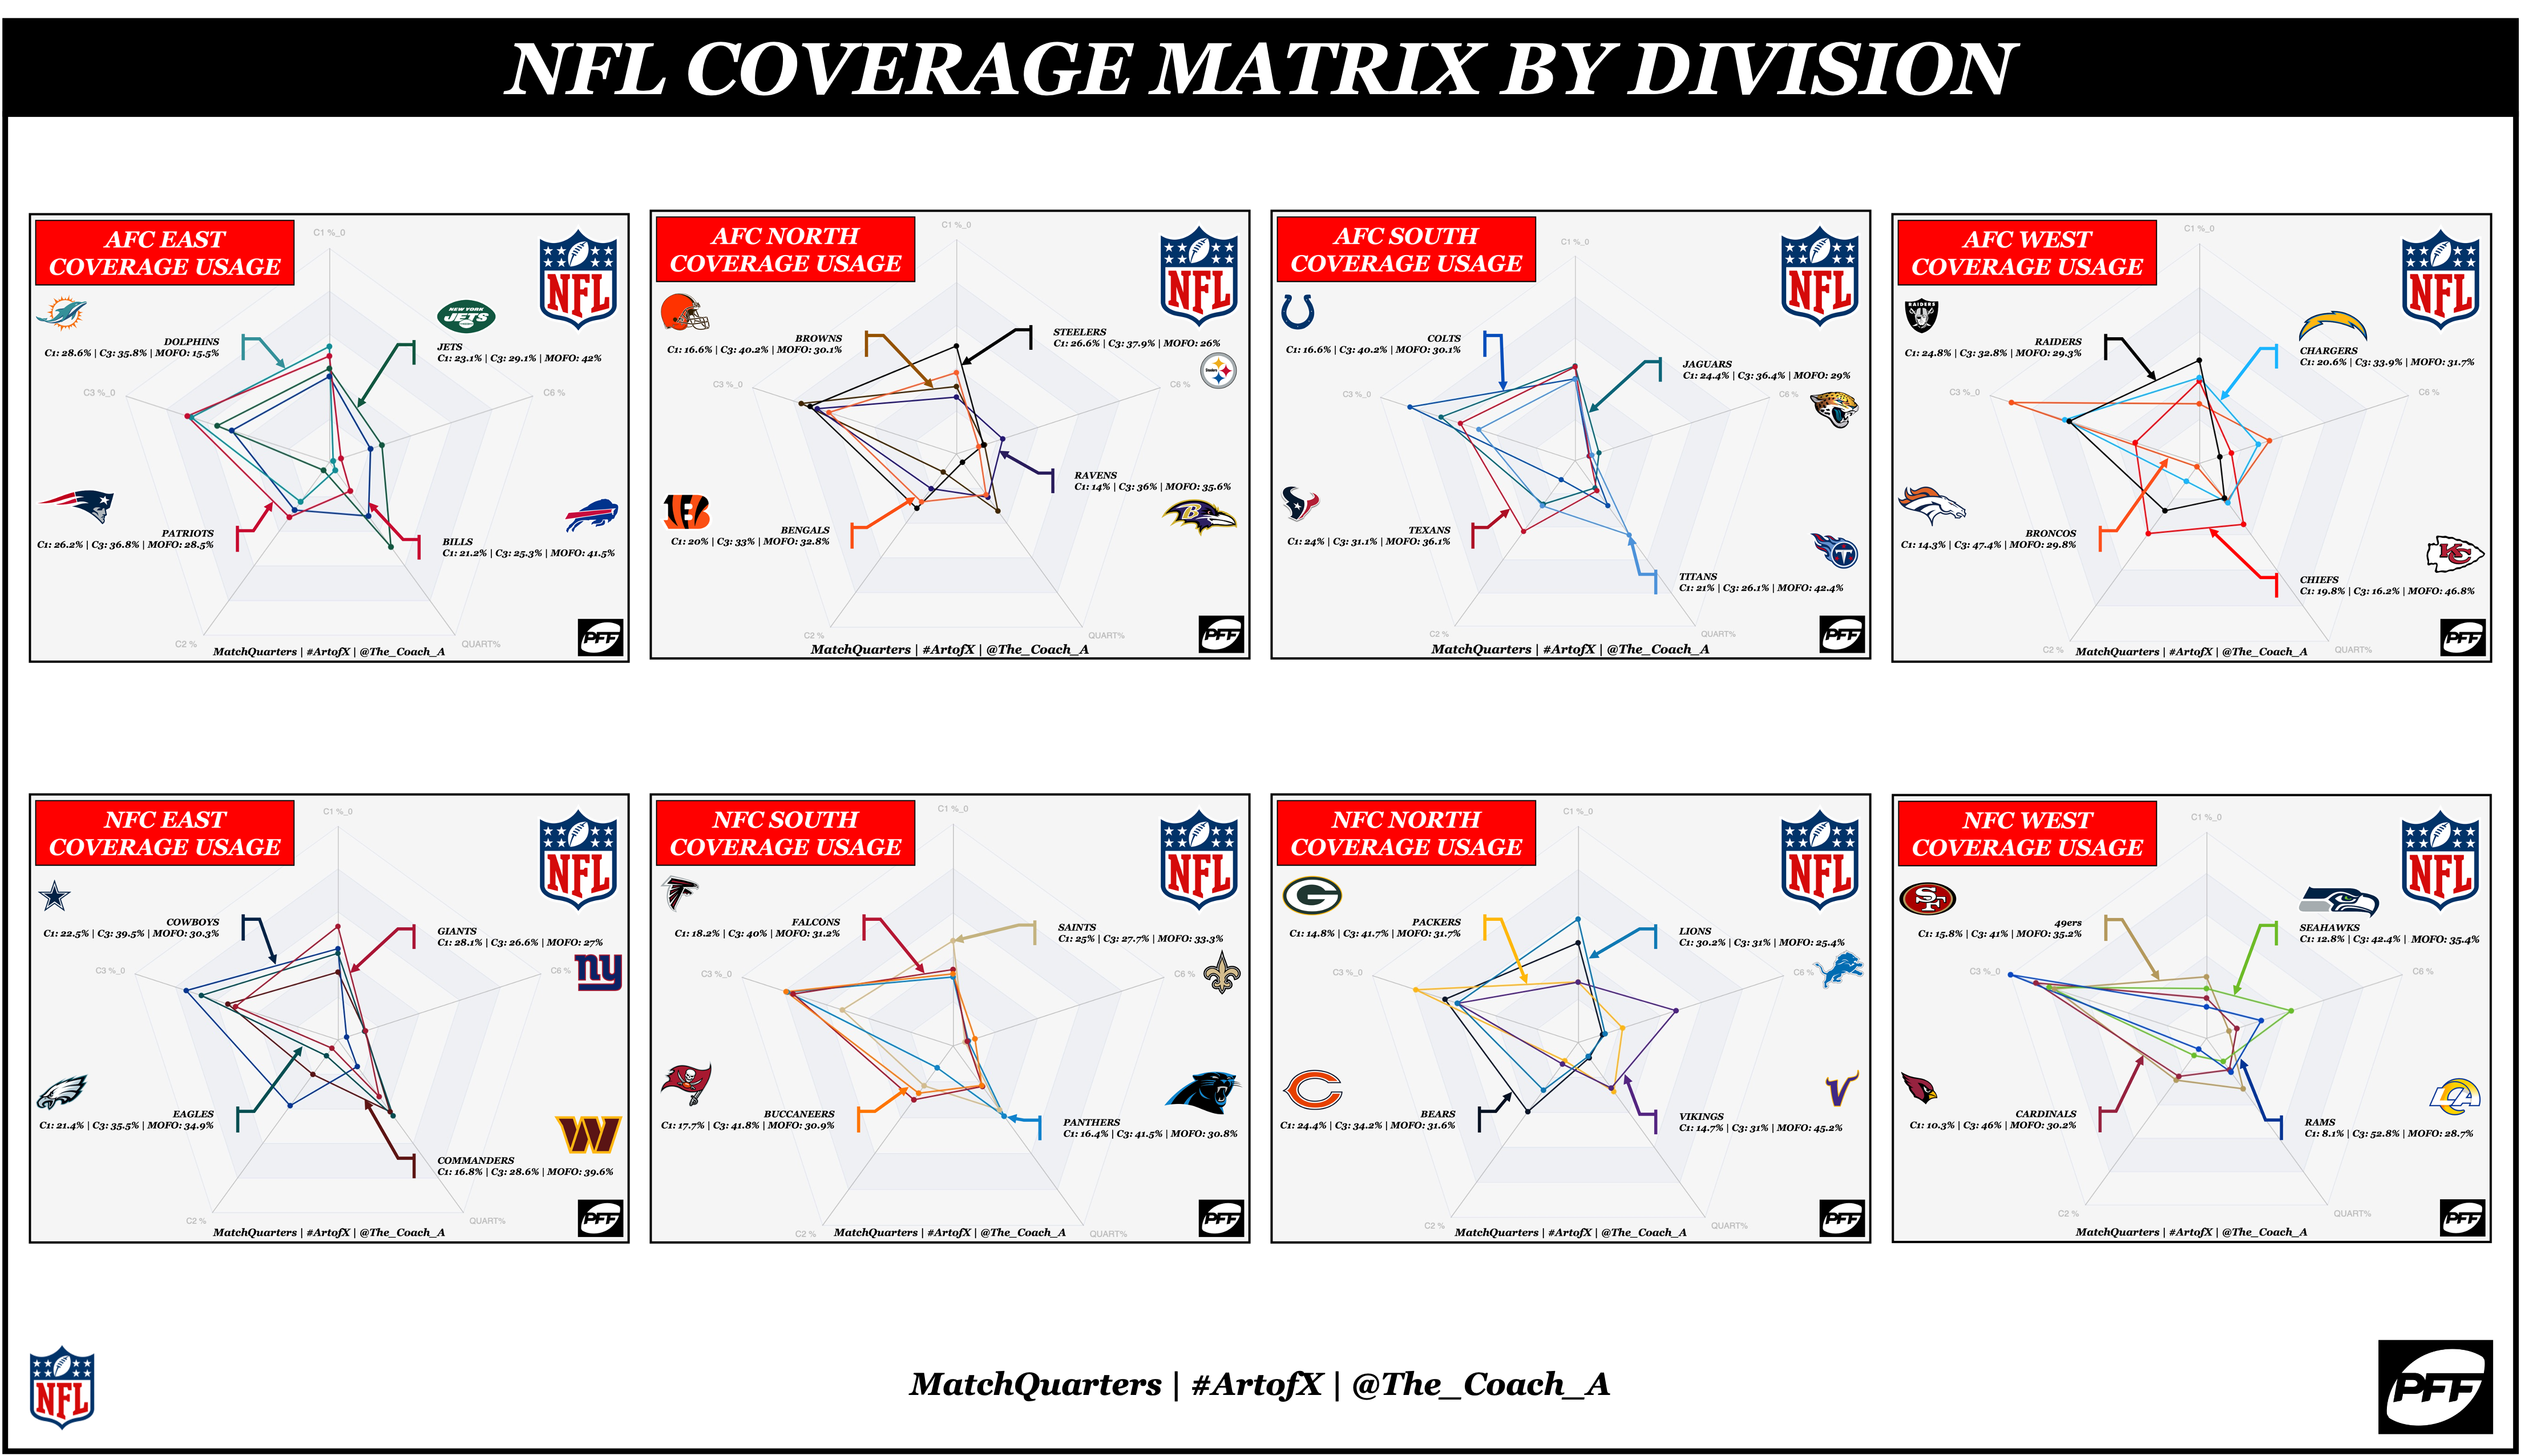 Analyzing the 22 NFC Coverage Matrices